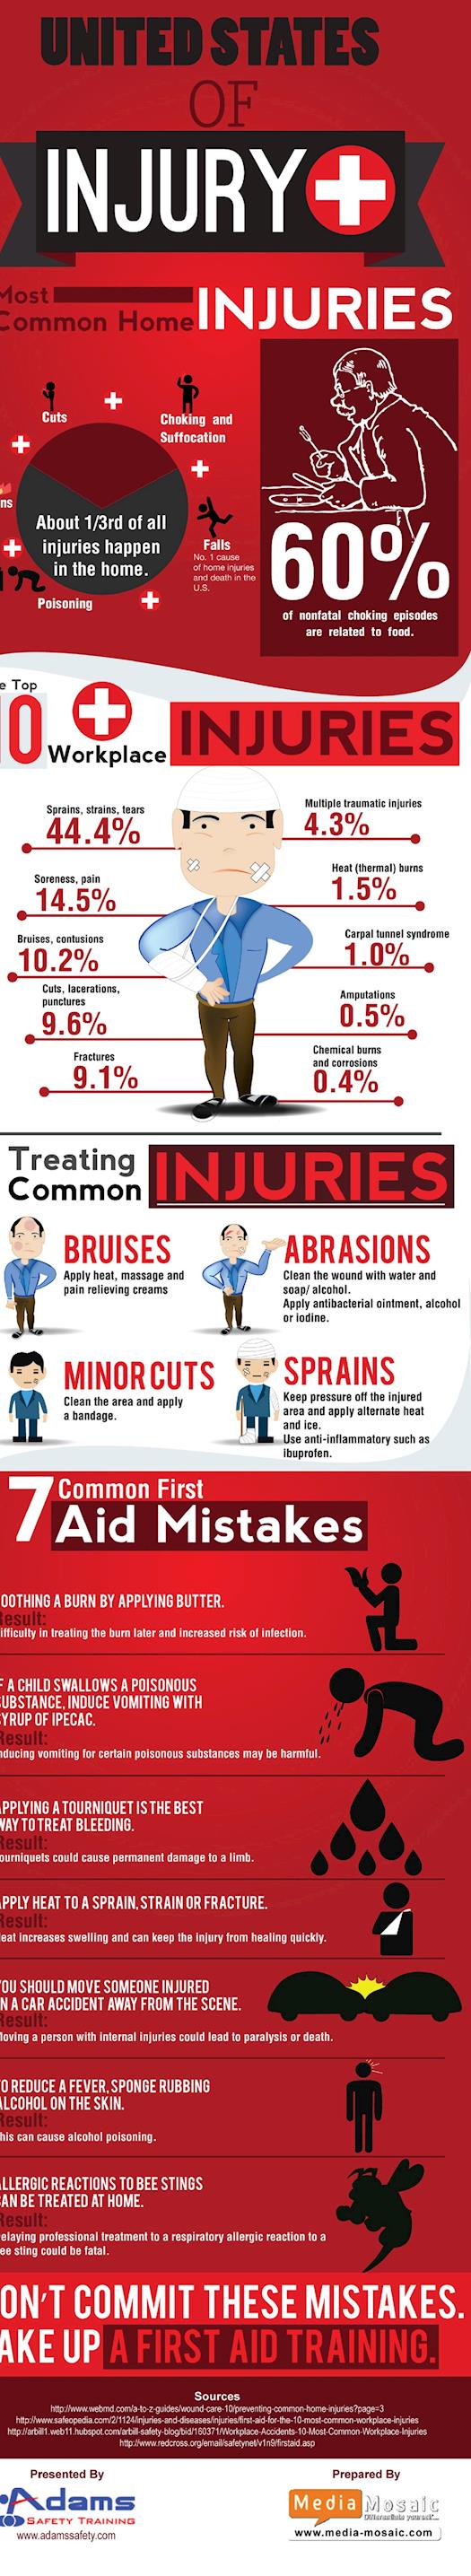 ‘The United States Of Injury’ – Infographic